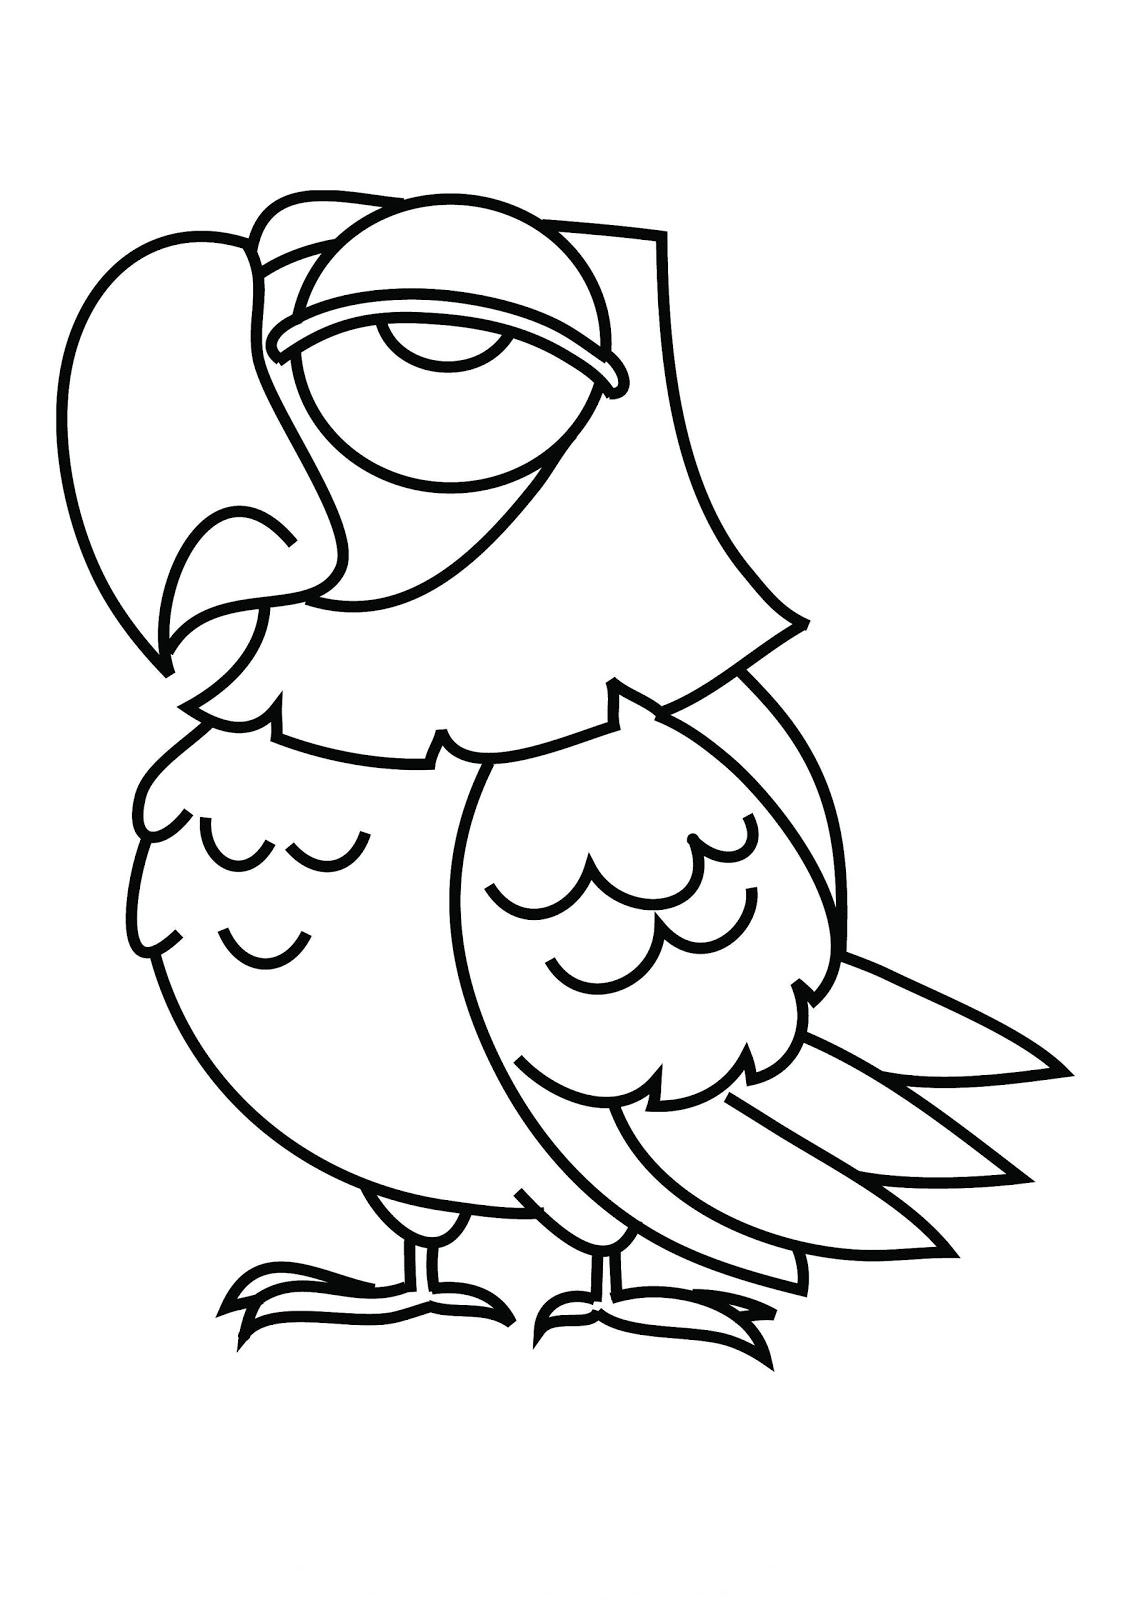 Bird Coloring Page ~ Child Coloring